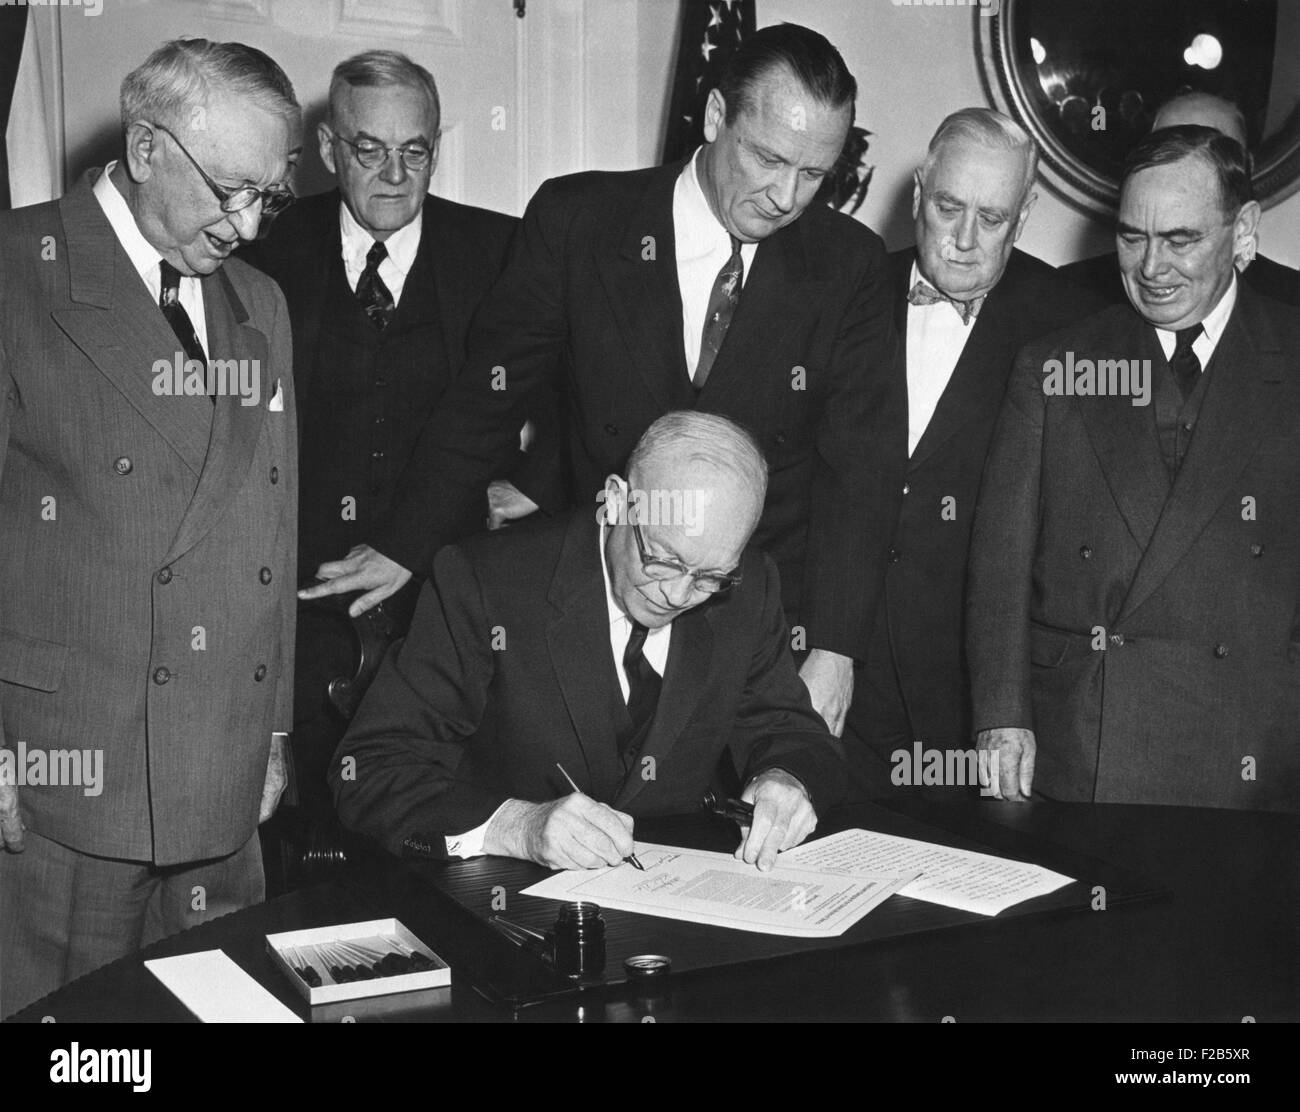 President Eisenhower signs House Joint Resolution 159. It authorized use of armed forces for protecting Formosa, and the Pescadores. Jan. 28, 1955. Standing, L-R: Walter George; John Foster Dulles; Sen. William Knowland; Sen. Alexander Wiley; Carl Albert. - (BSLOC 2014 16 233) Stock Photo